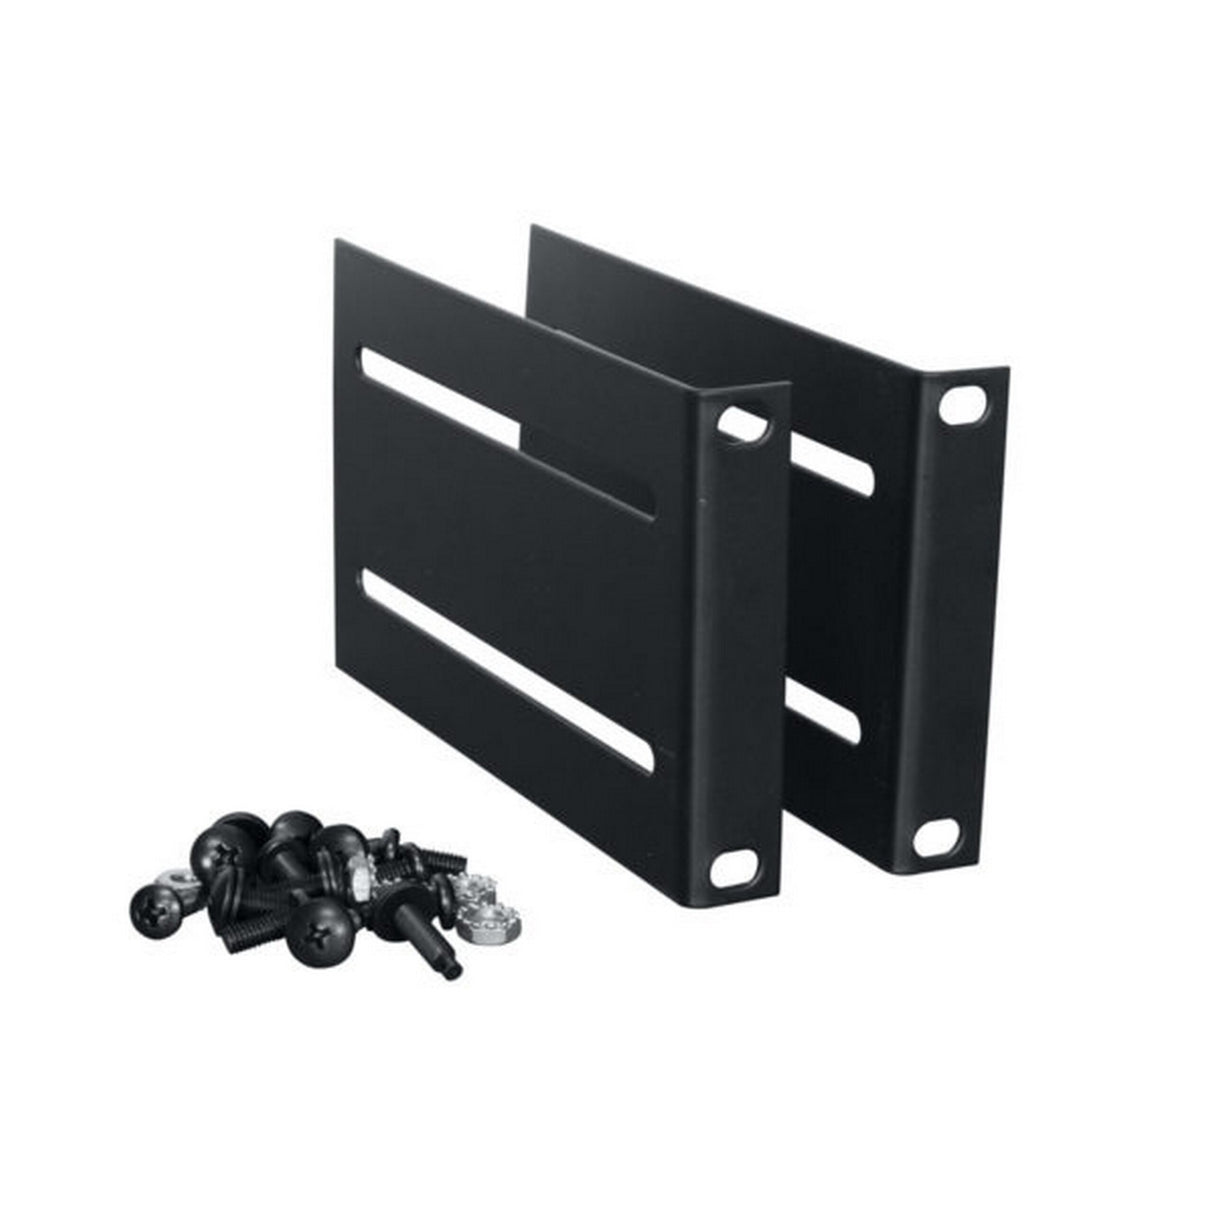 Lowell PCMB-6 Mounting Brackets for Power Strips, Cable Managers